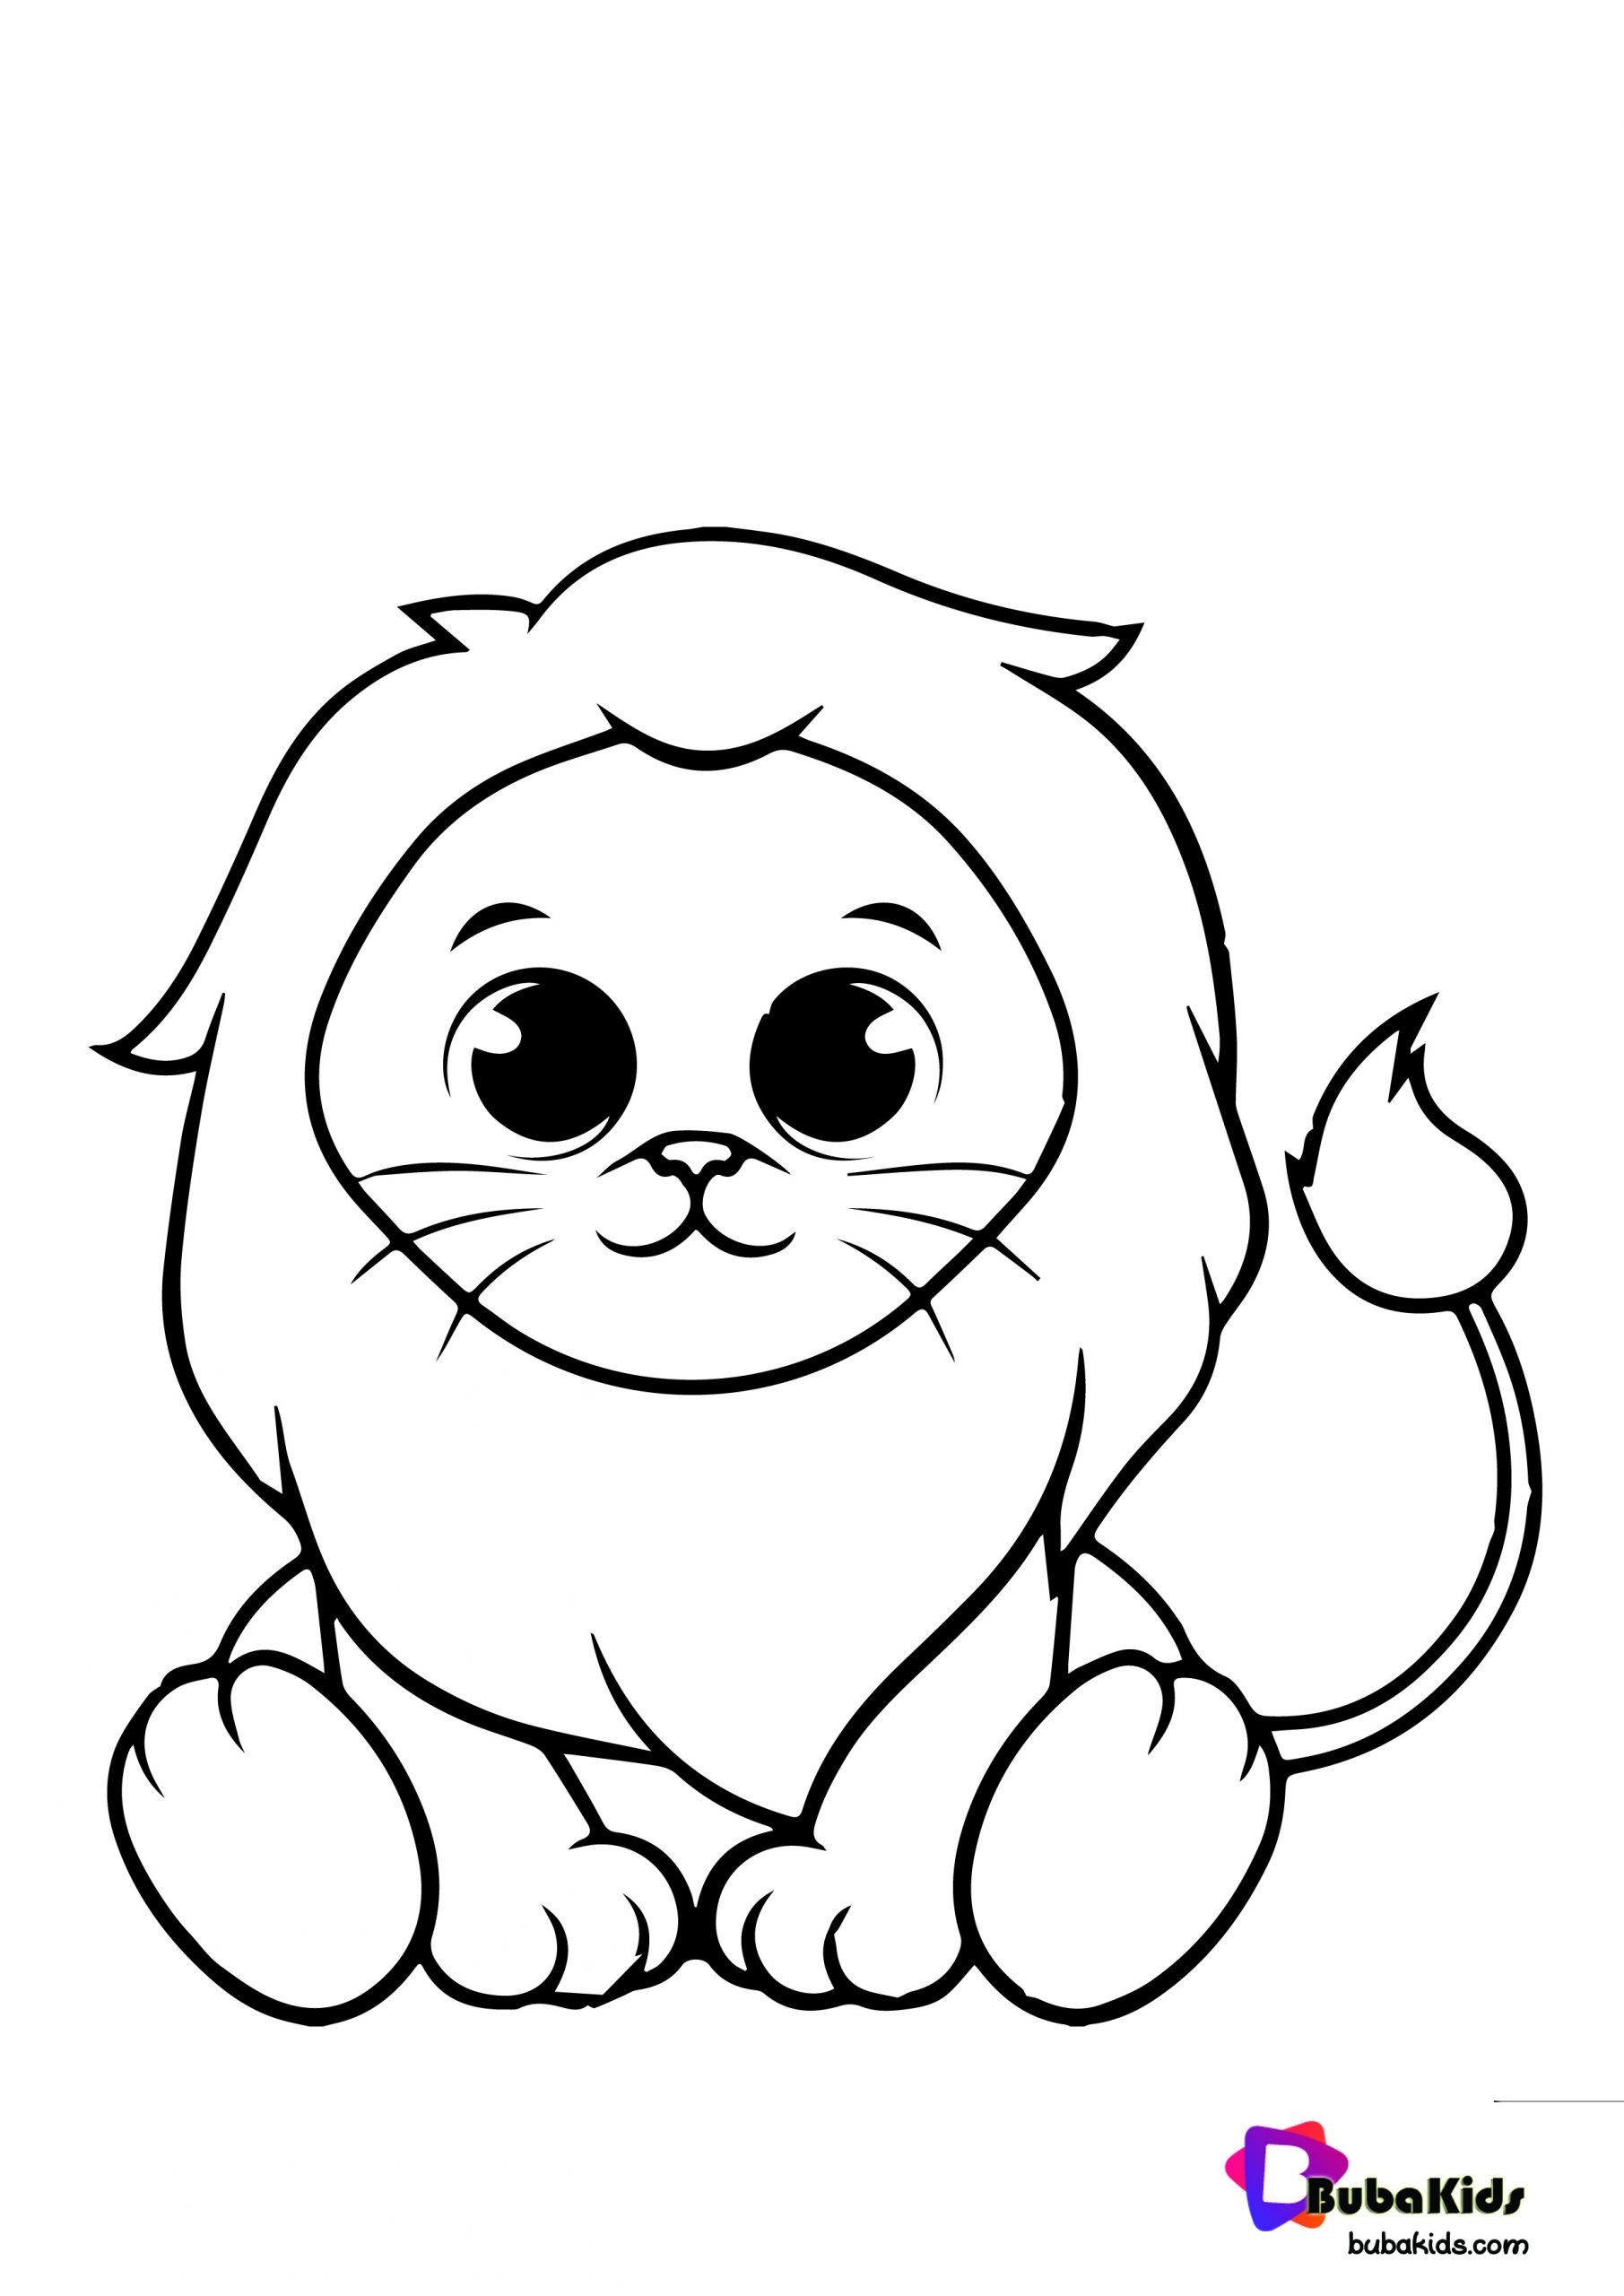 Lion Coloring Page For Toddler Wallpaper